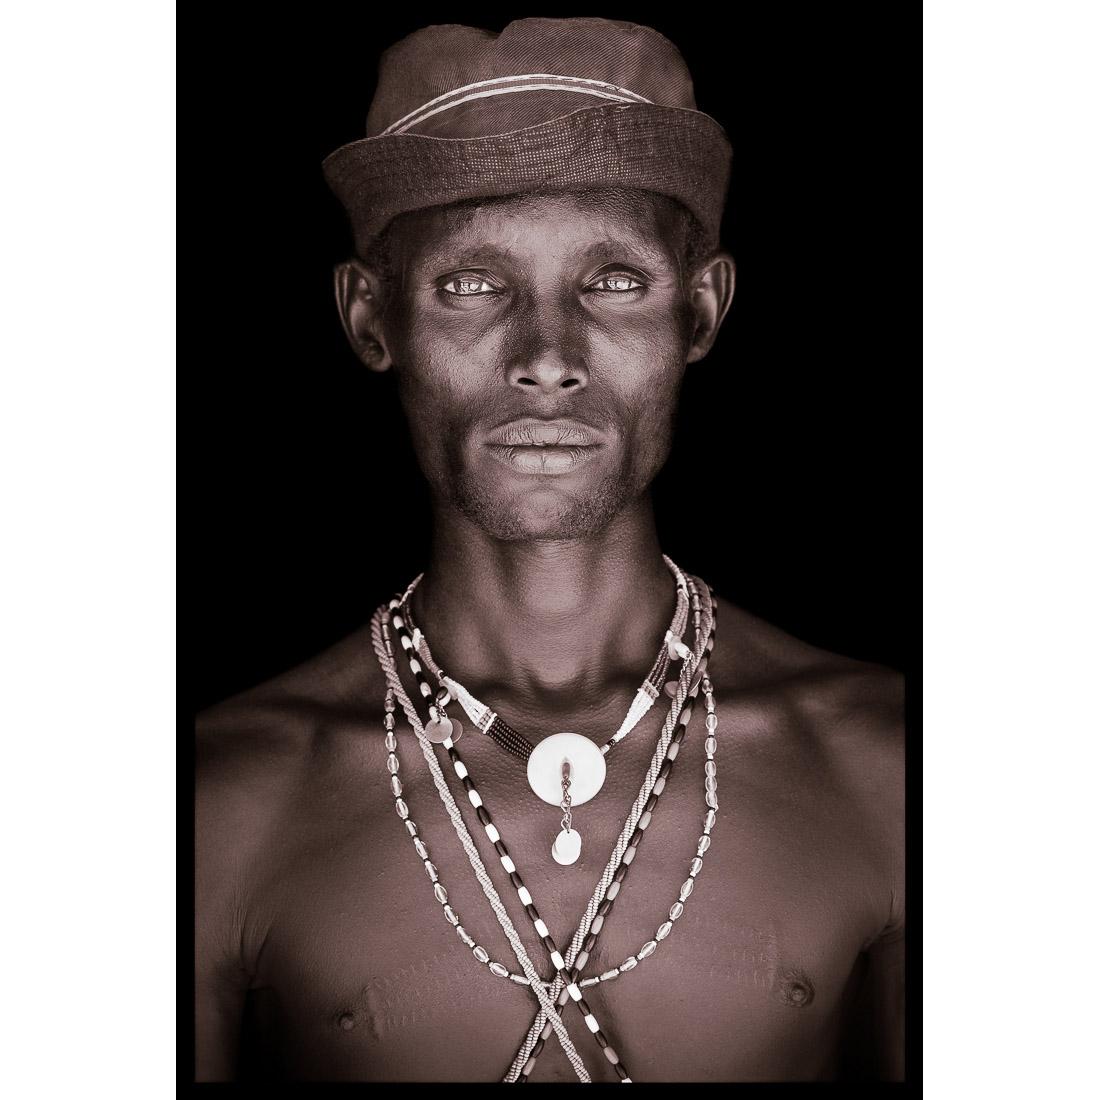 A portrait of Ltailson, a Samburu man from northern Kenya in 2019.

John Kenny’s work is all shot on location in some of the remotest corners of Africa. His images are all taken with natural light and his subjects in their day to day attire.

The